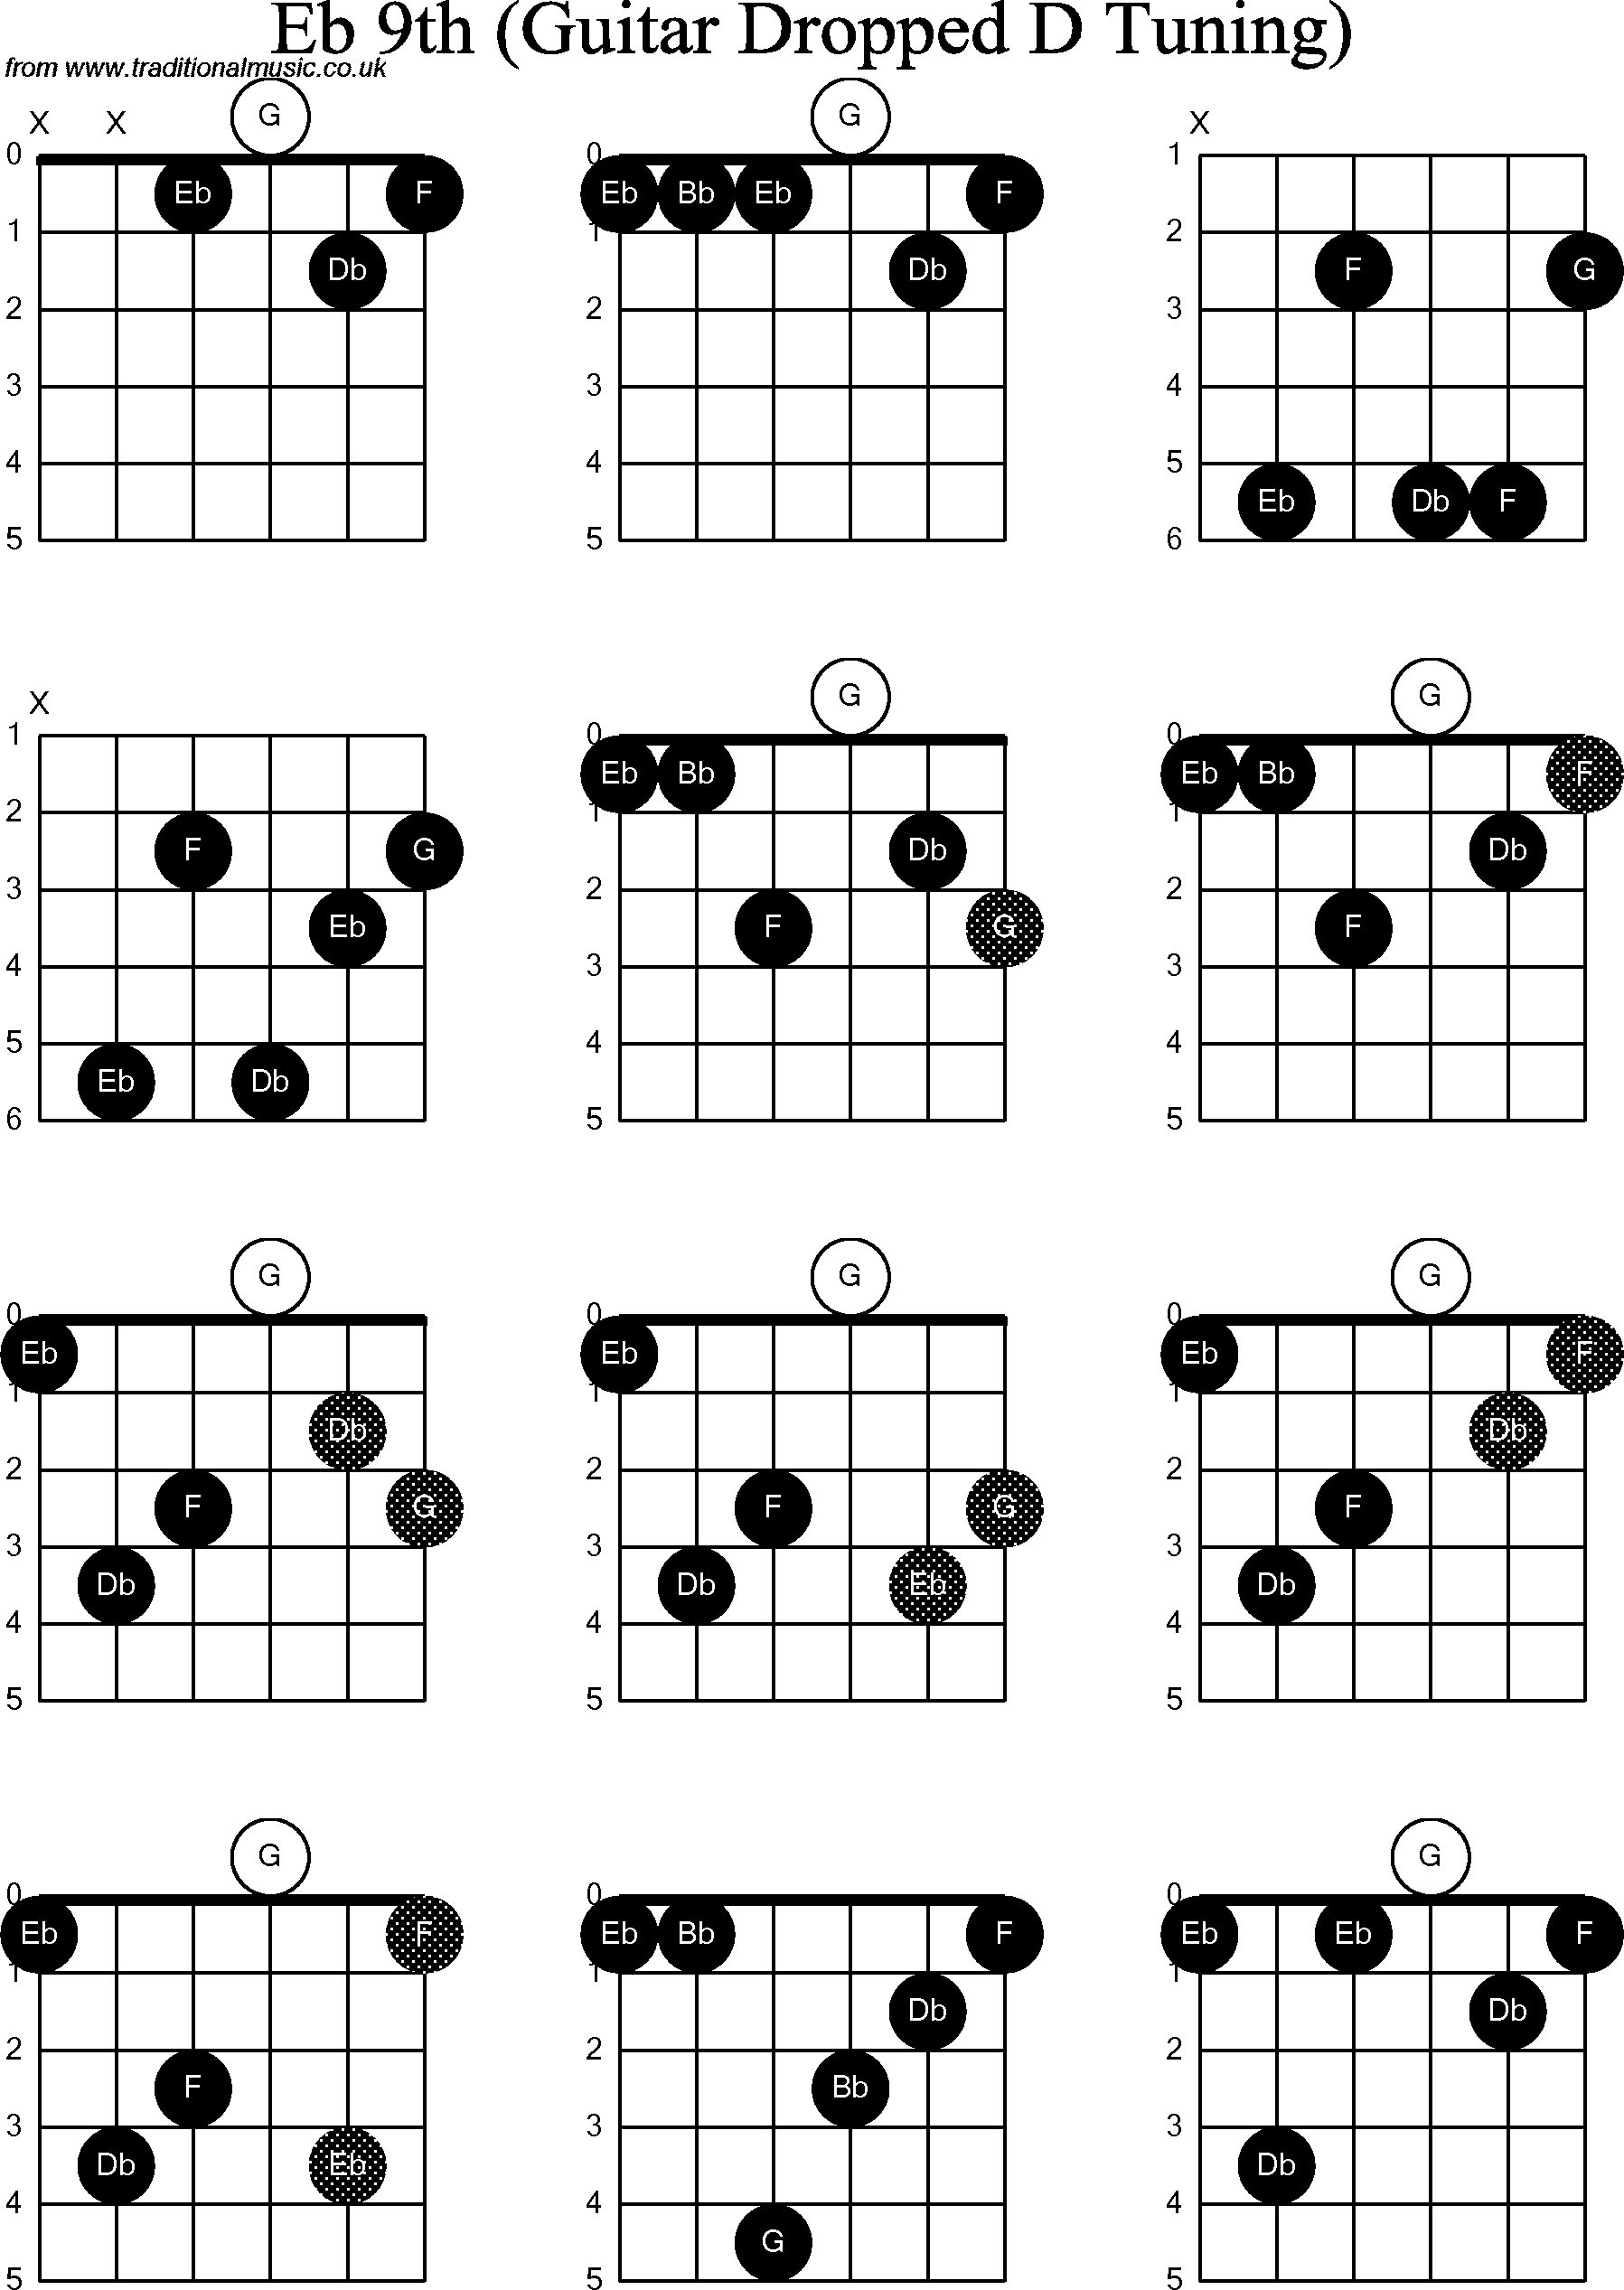 Chord diagrams for dropped D Guitar(DADGBE), Eb9th